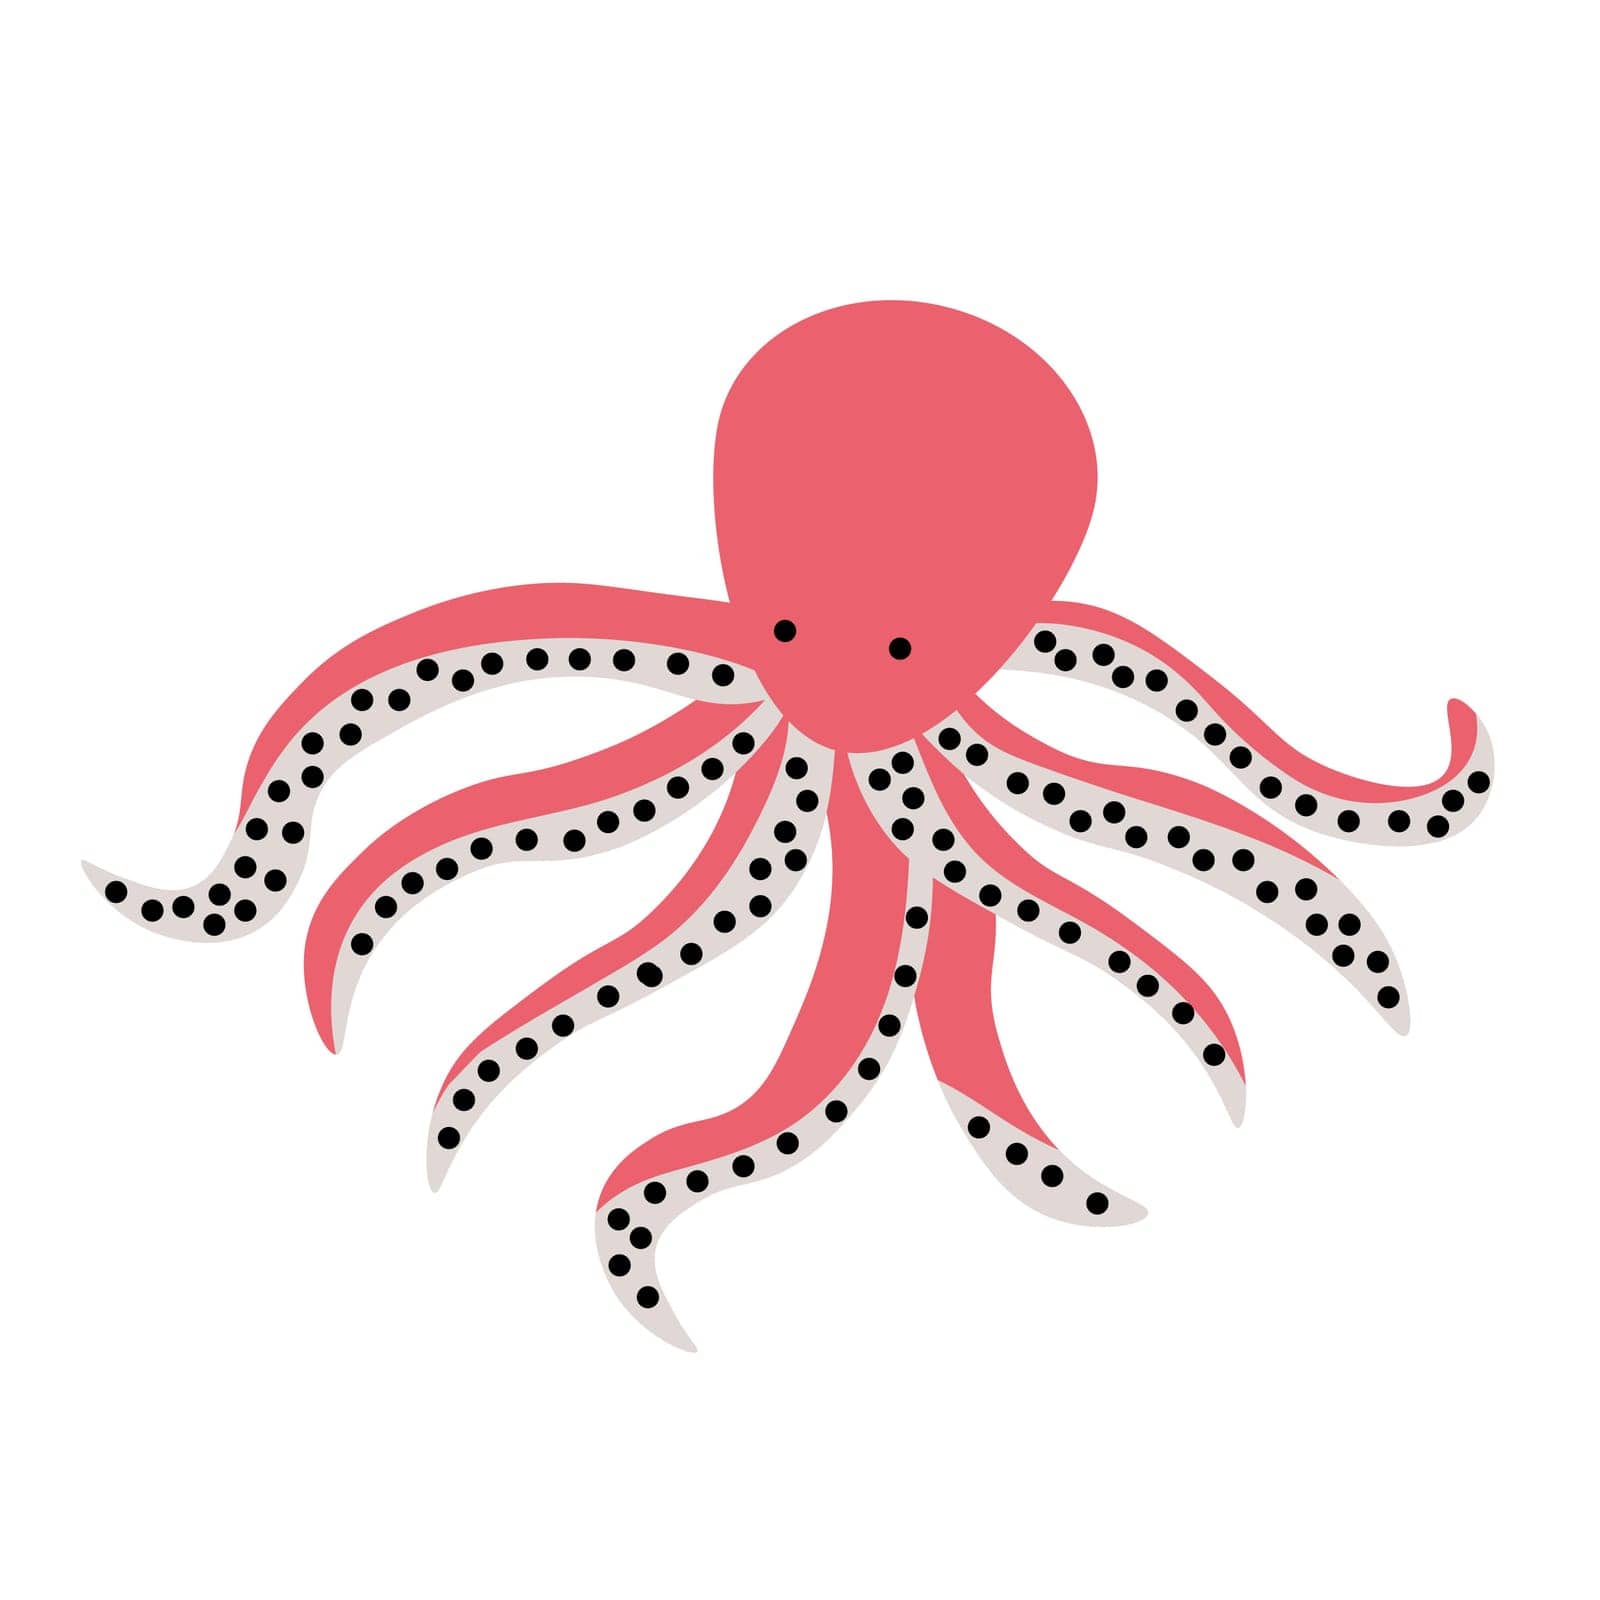 Red octopus cartoon character. Cute octopus flat vector isolated on white background. Aquatic fauna. Octopus icon. Animal illustration for zoo ad, nature concept, children book illustrating